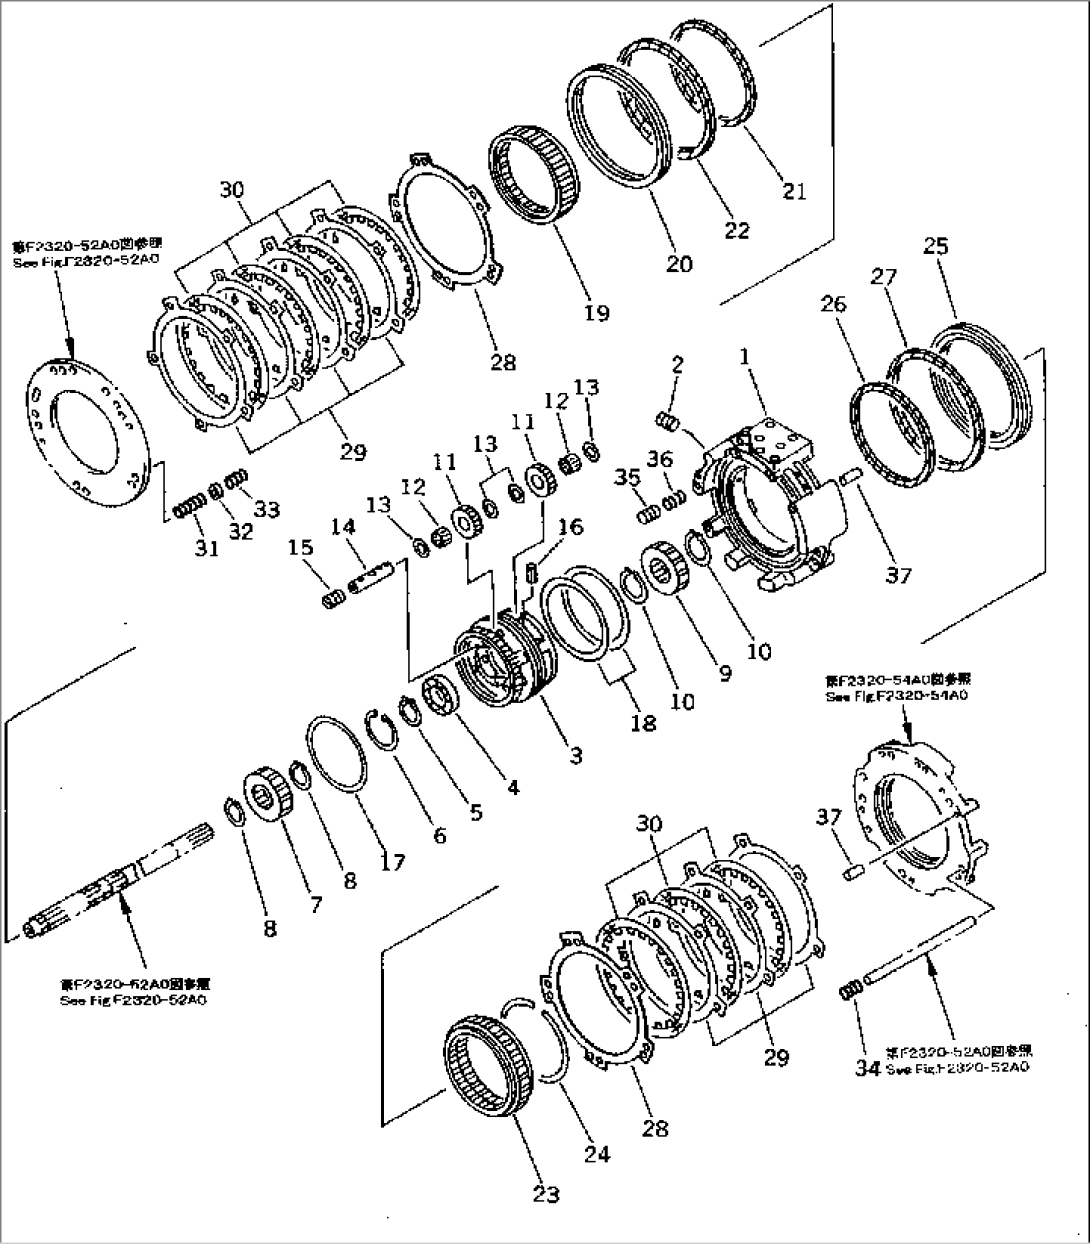 TRANSMISSION (FORWARD AND 3RD HOUSING) (3/7)